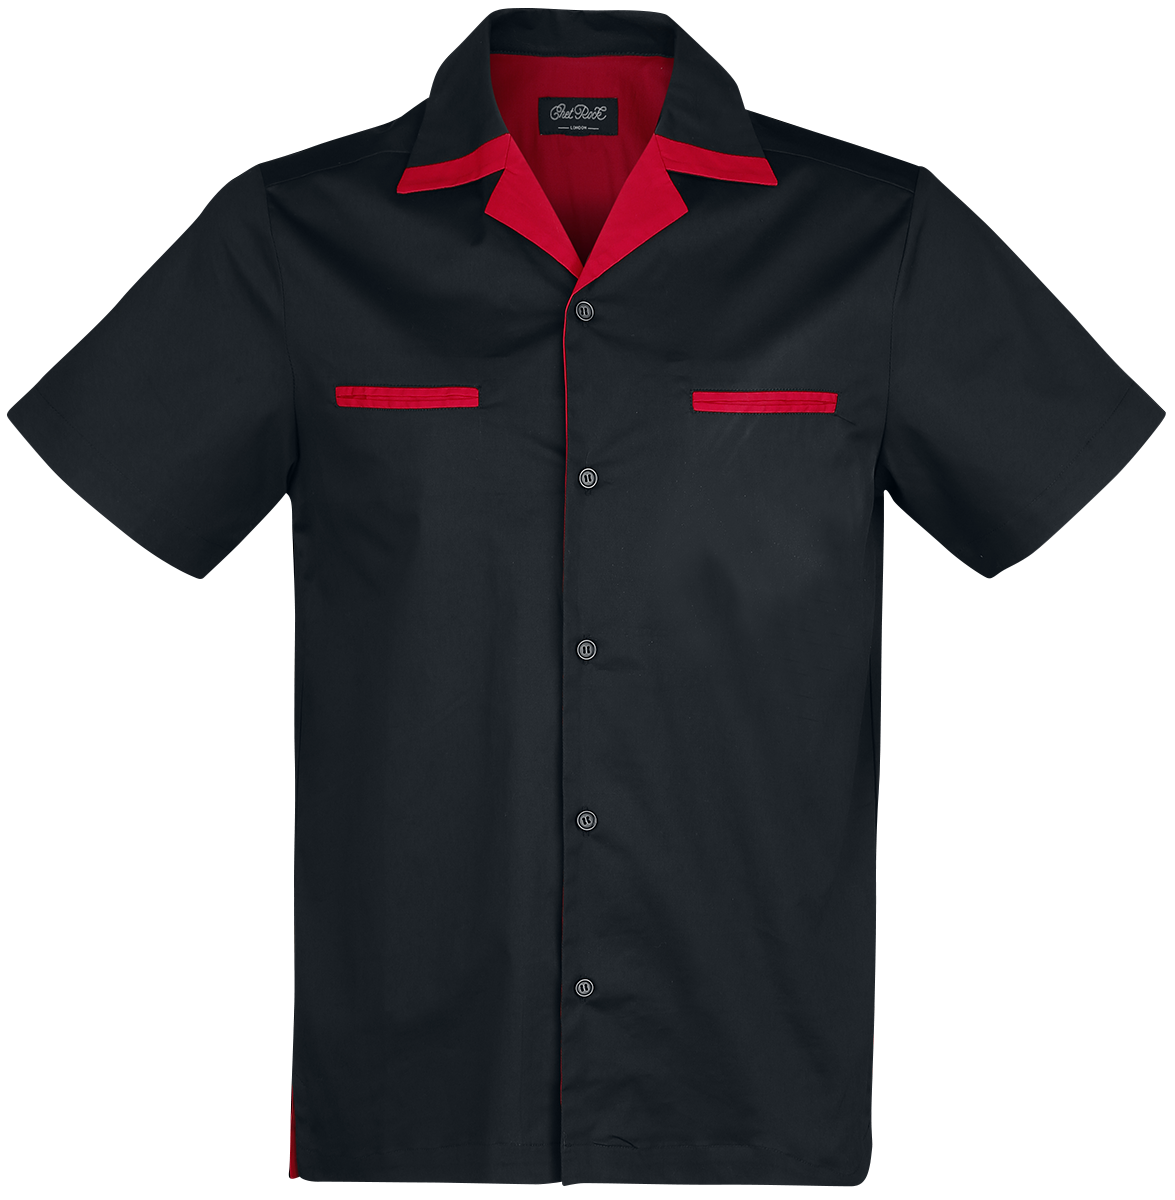 Chet Rock - Donnie Bowling Shirt - Workershirt - black-red image